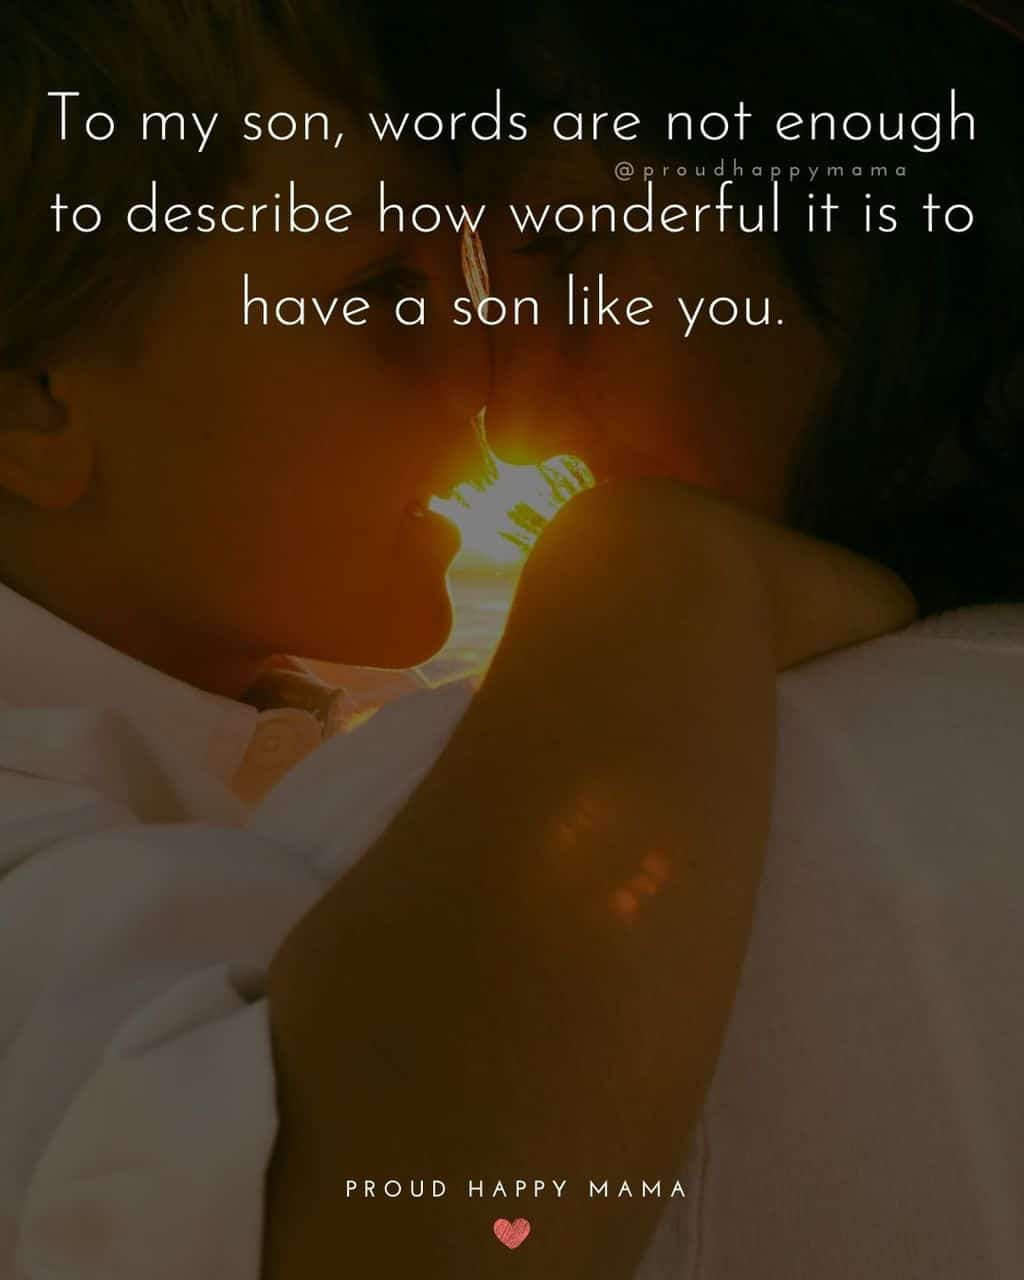 Son Quotes - To my son, words are not enough to describe how wonderful it is to have a son like you.’